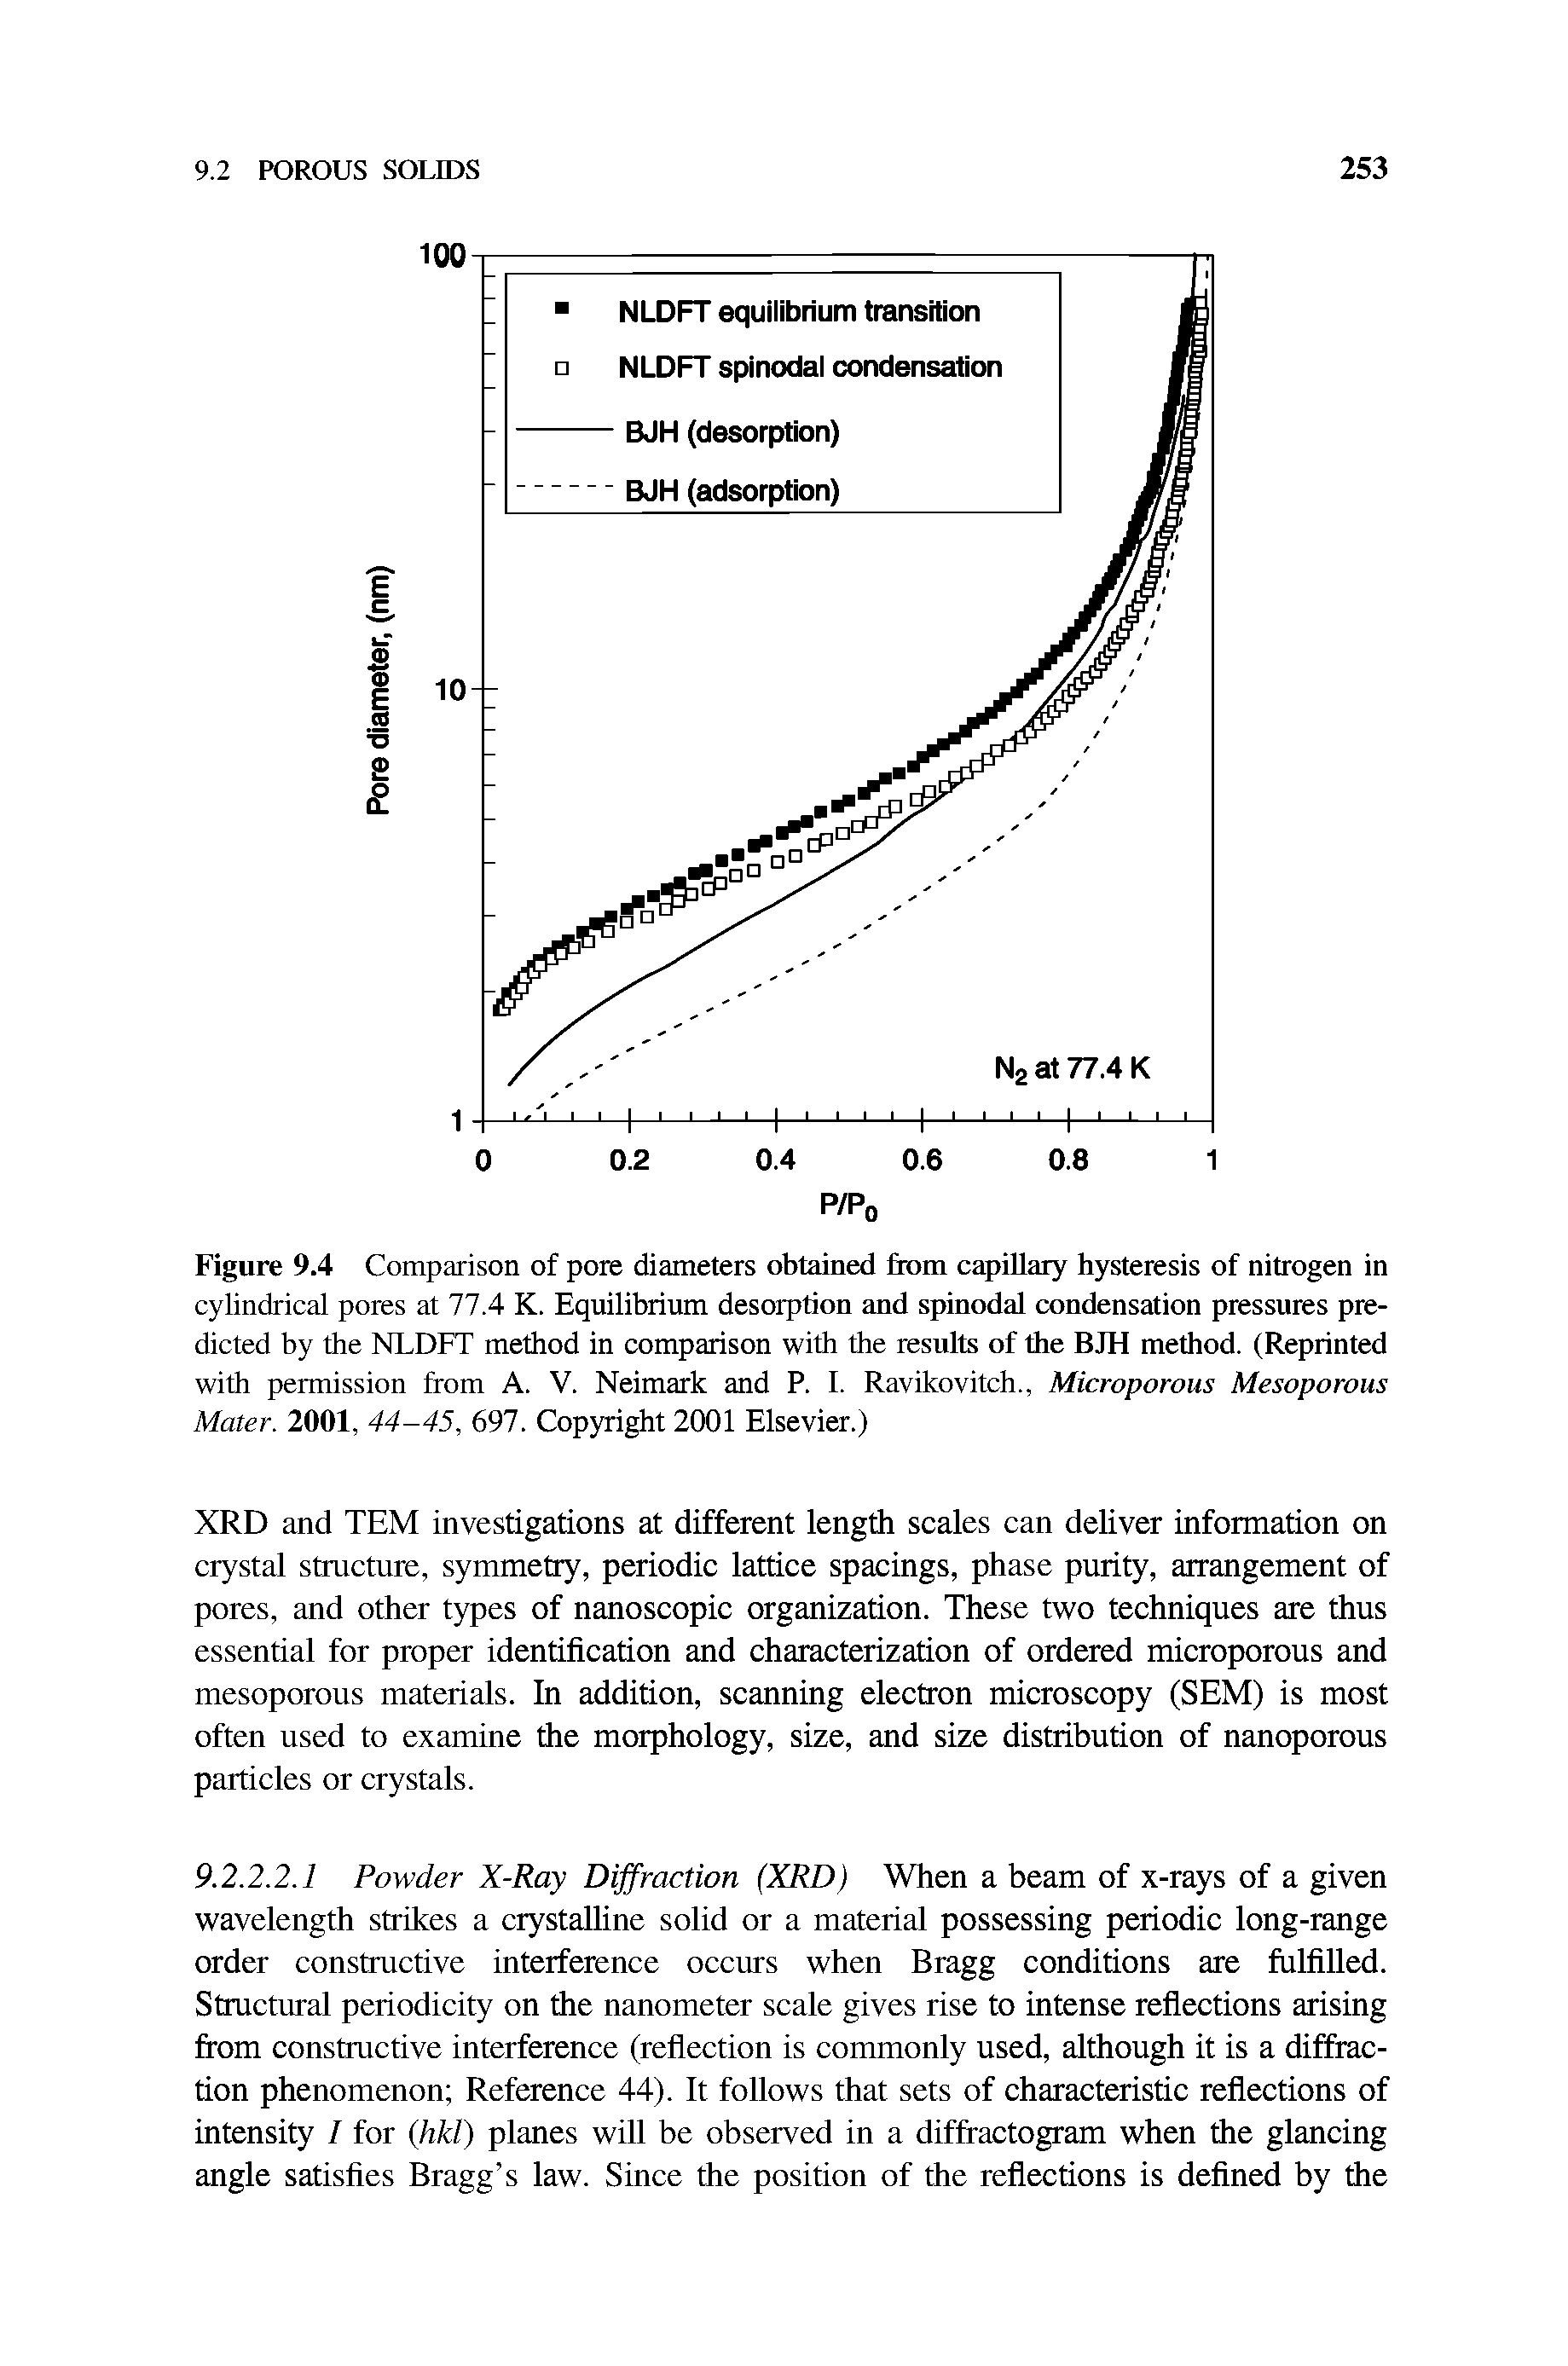 Figure 9.4 Comparison of pore diameters obtained from capillary hysteresis of nitrogen in cylindrical pores at 77.4 K. Equilibrium desorption and spinodal condensation pressures predicted by the NLDFT method in comparison with the resuits of the BJH method. (Reprinted with permission from A. V. Neimark and P. 1. Ravikovitch., Microporous Mesoporous Mater. 2001, 44-45, 697. Copyright 2(X)1 Elsevier.)...